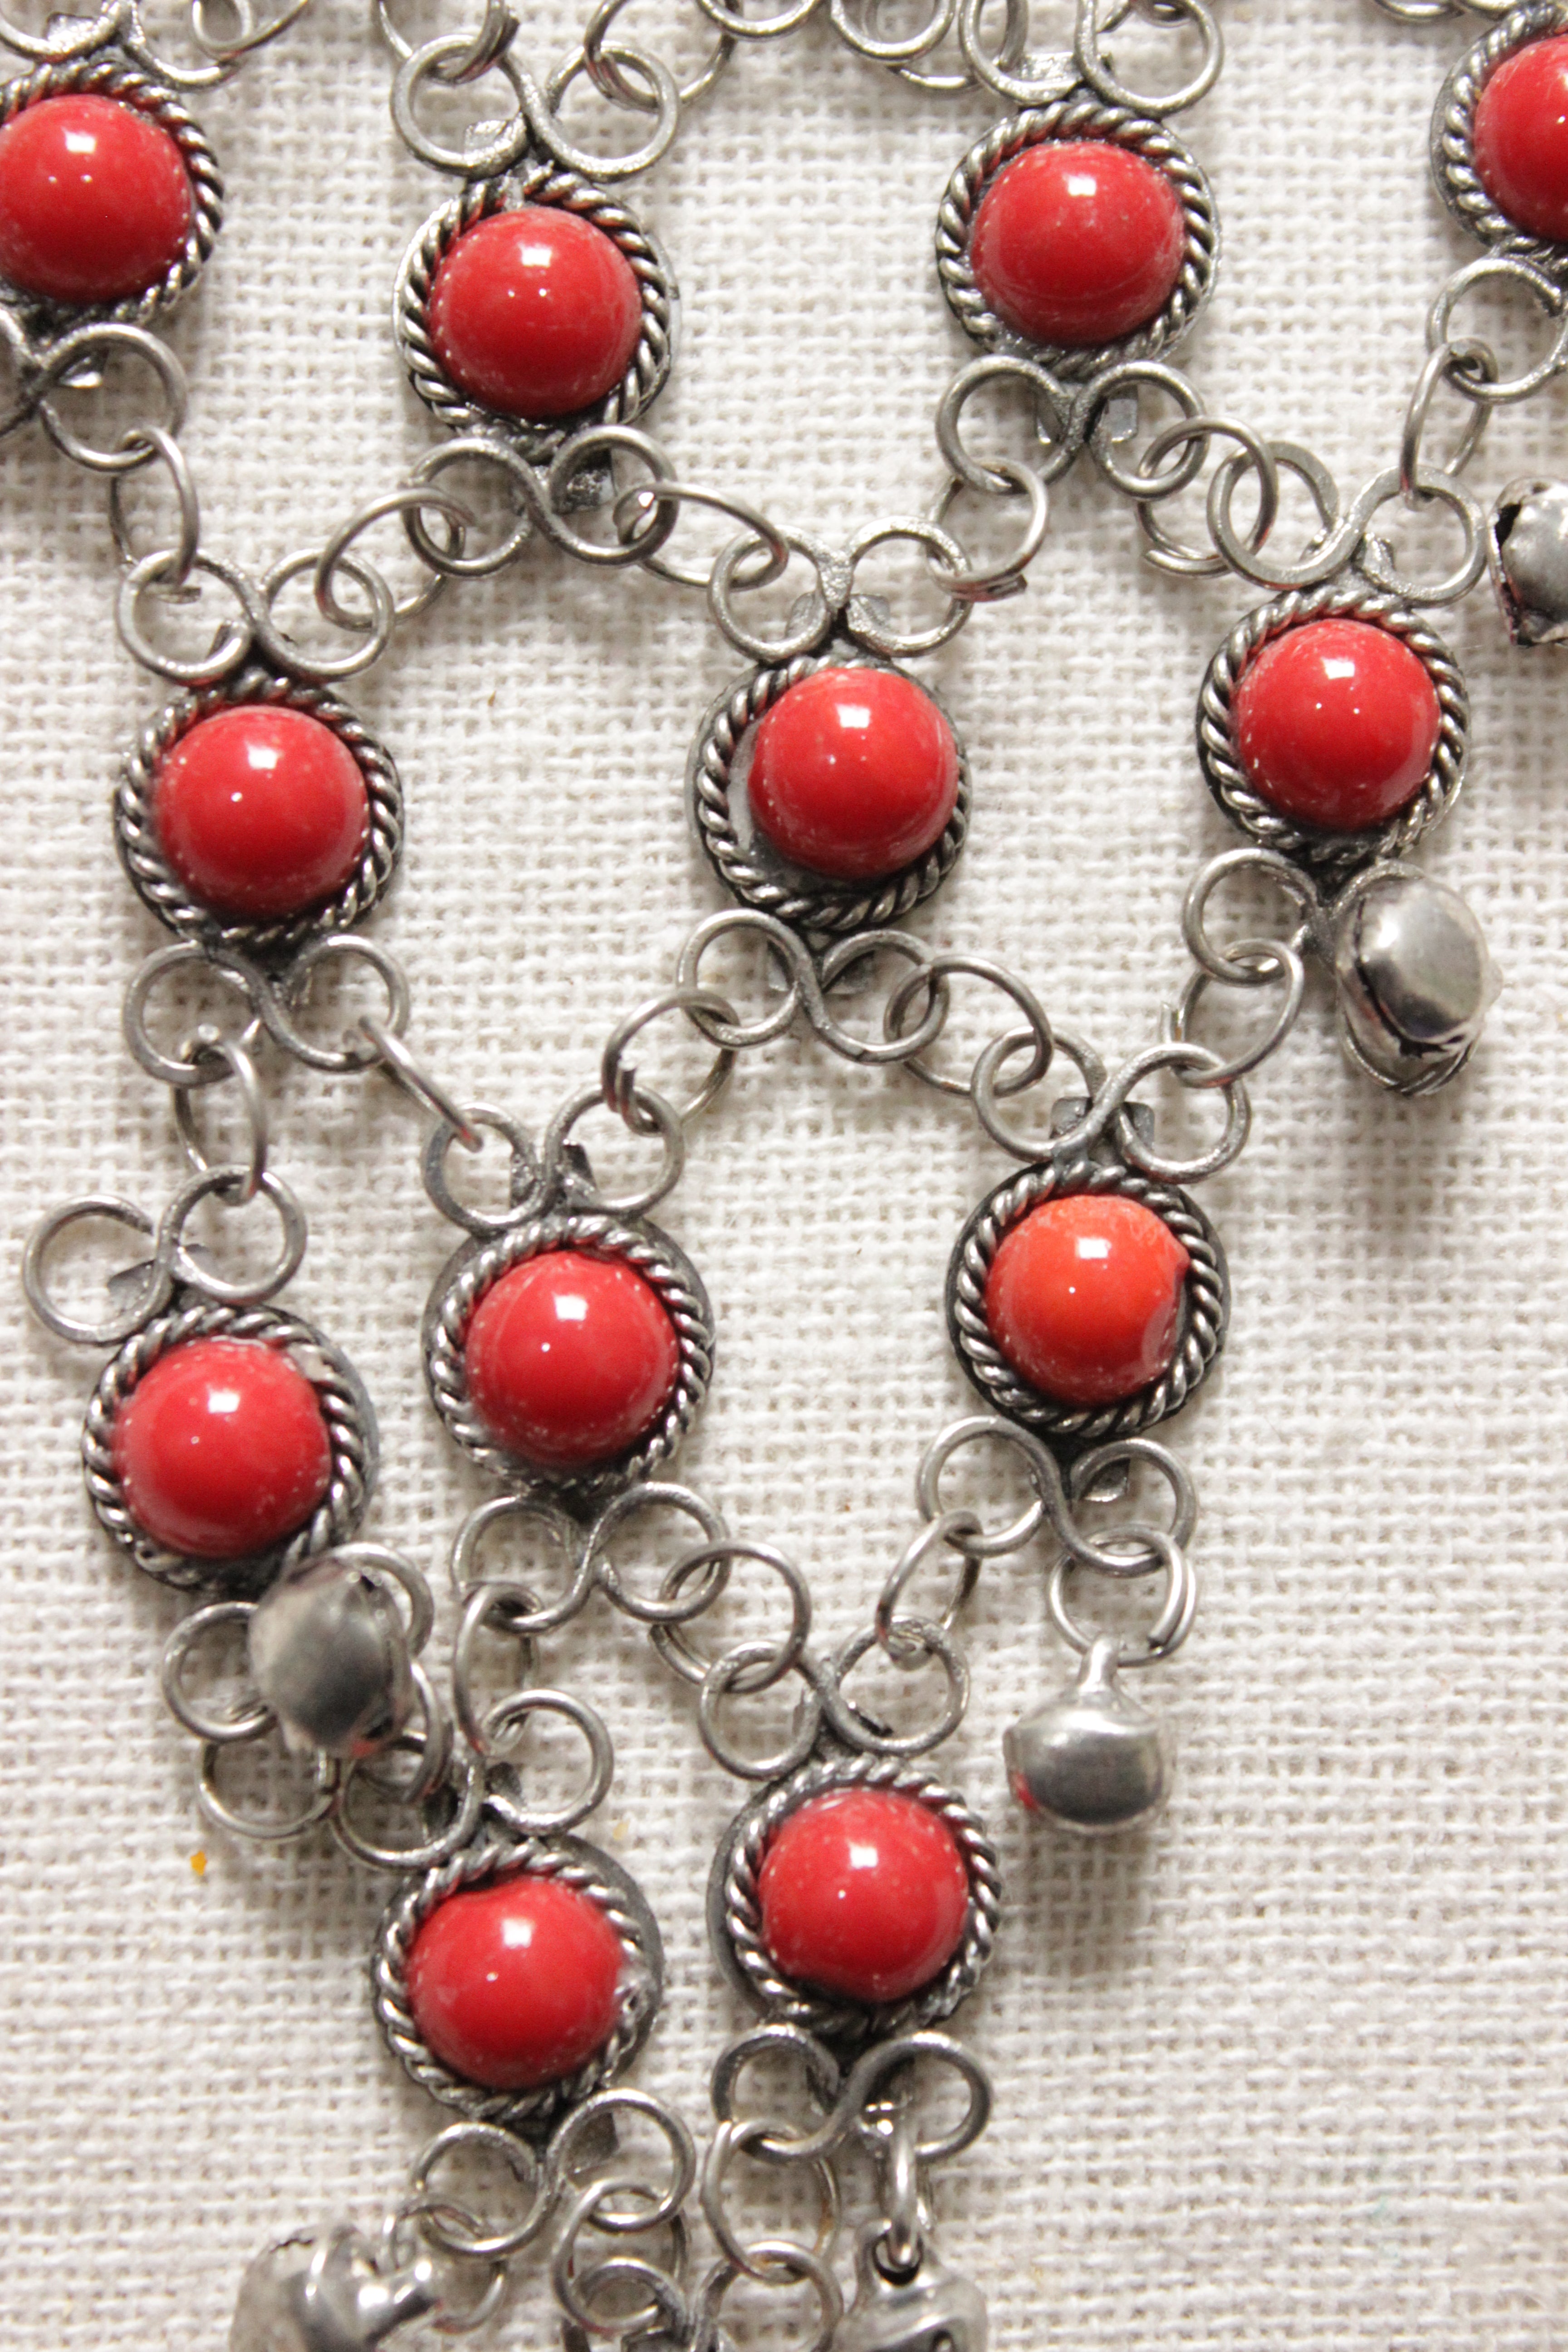 Coral Red Glass Stones Embedded Silver Finish Choker Style Jaali Pattern Long Necklace Set